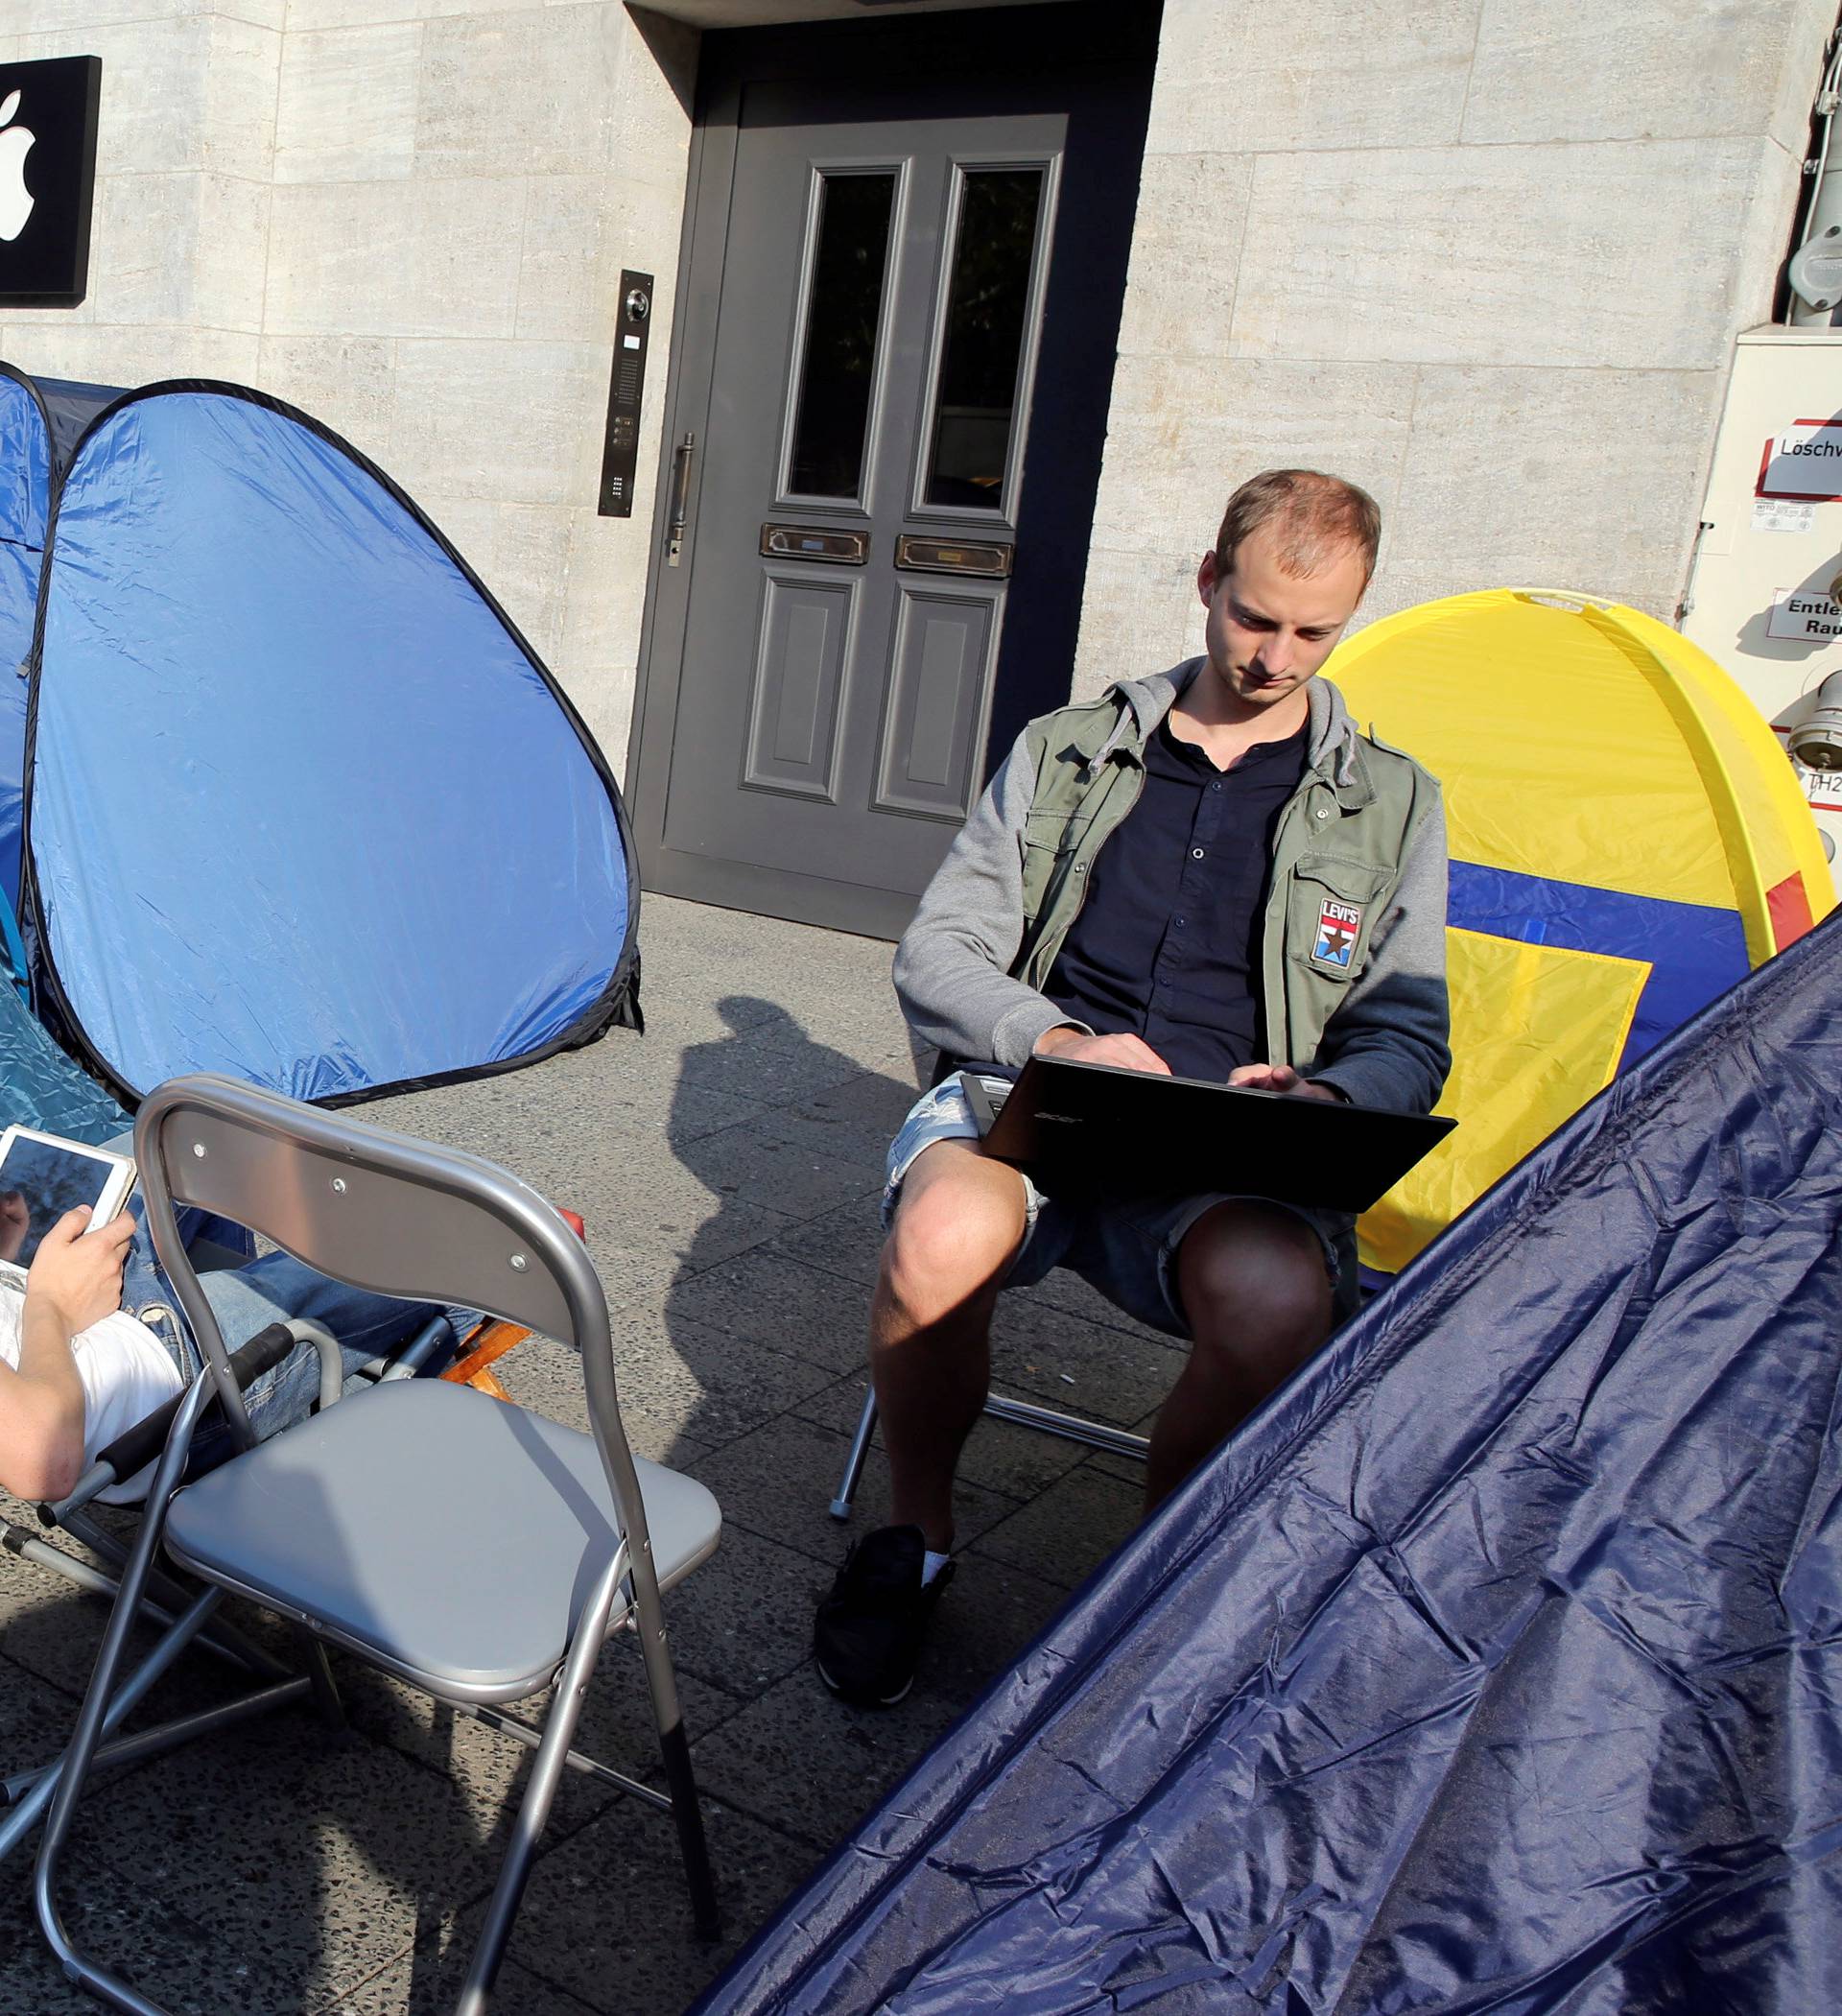 Customers from Belarus wait beside their tents outside an Apple store to buy the newly released Apple iPhone 7 in Berlin